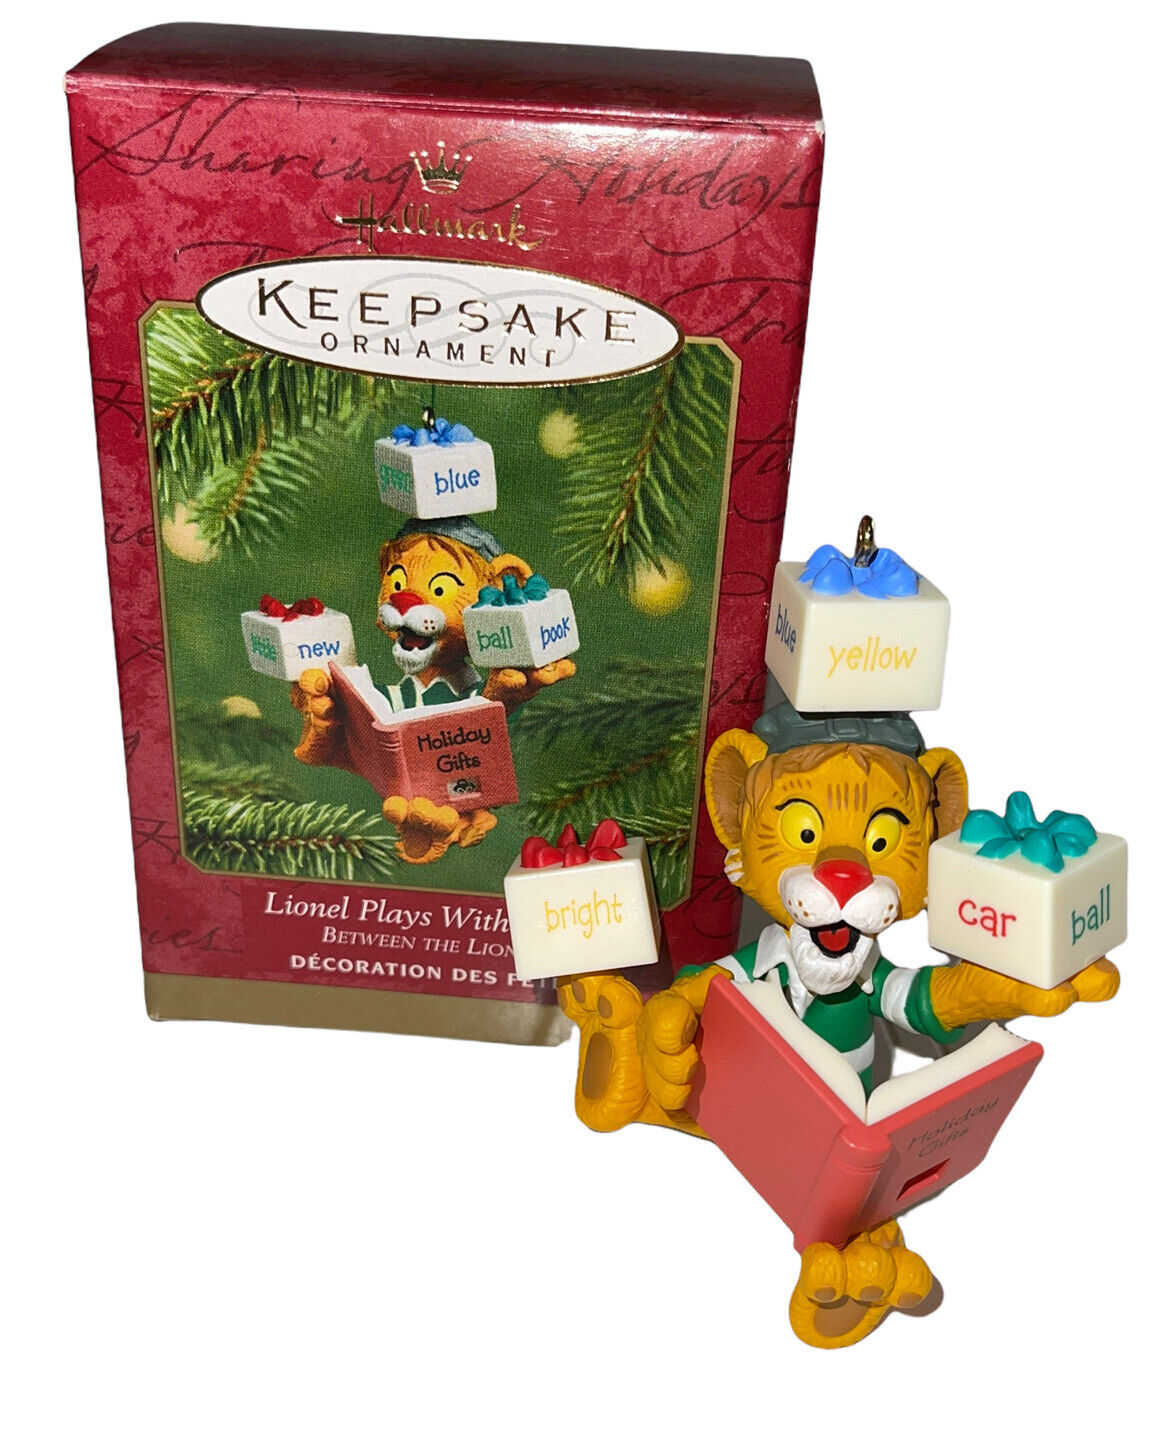 Hallmark Keepsake Ornament Lionel Plays With Words 2001 Between the Lions PBS